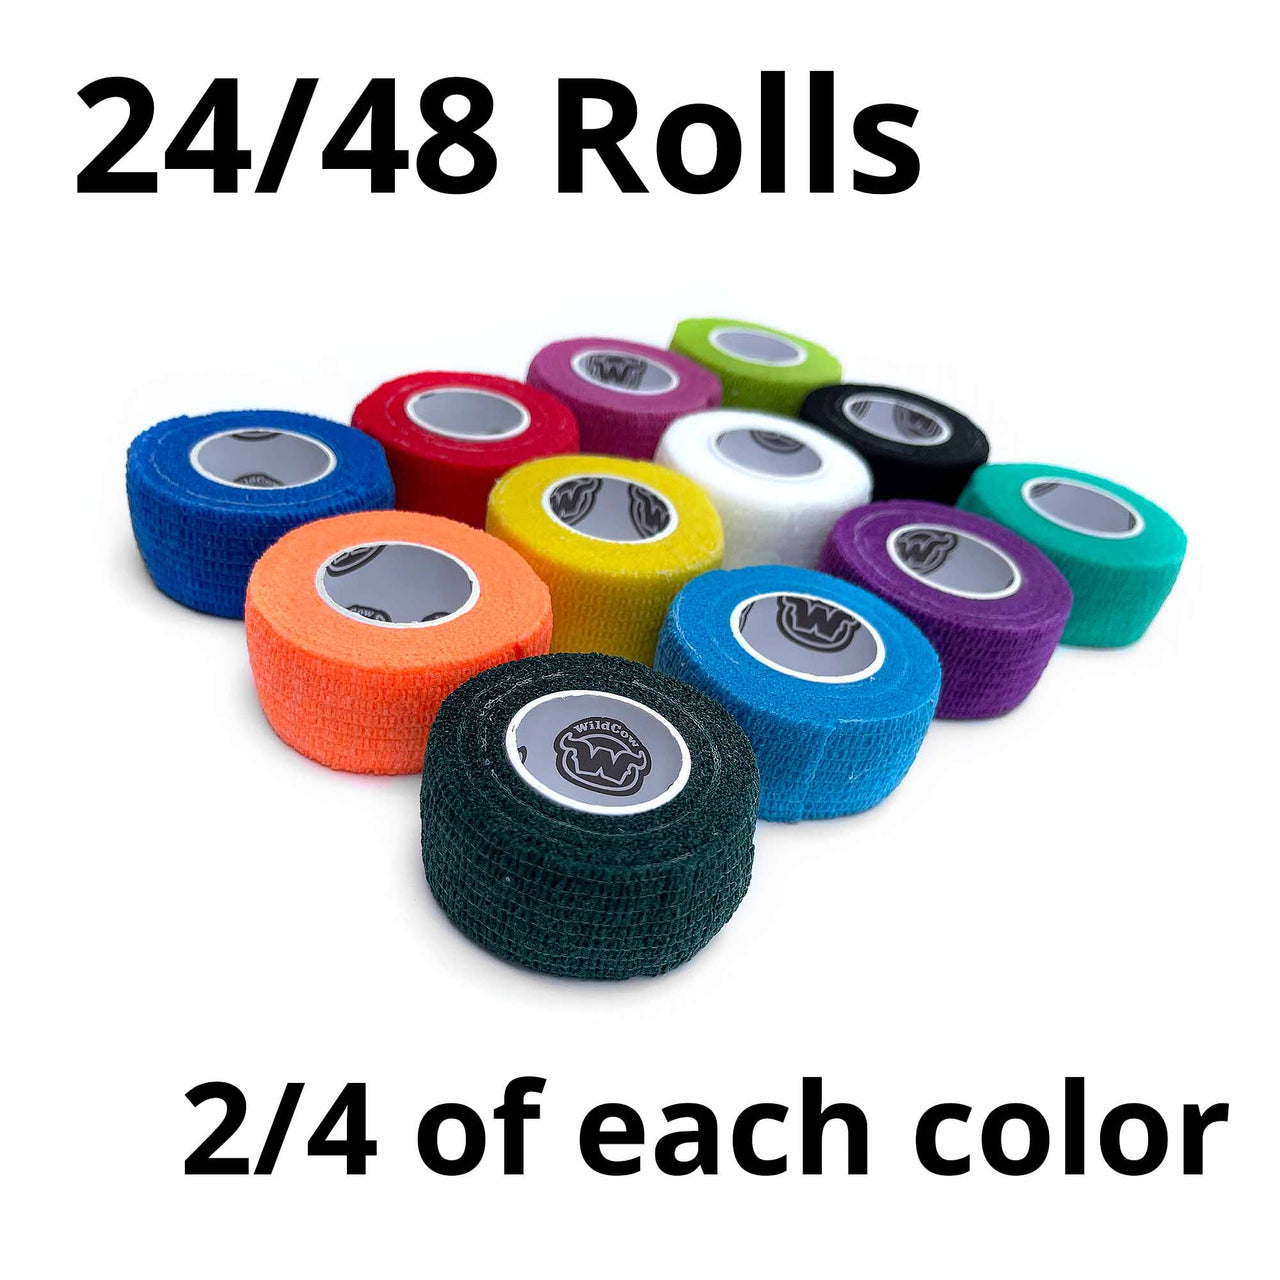 WildCow 1 Inch Multicolored Vet Wrap - 24/48 Rolls, 2/4 of each color